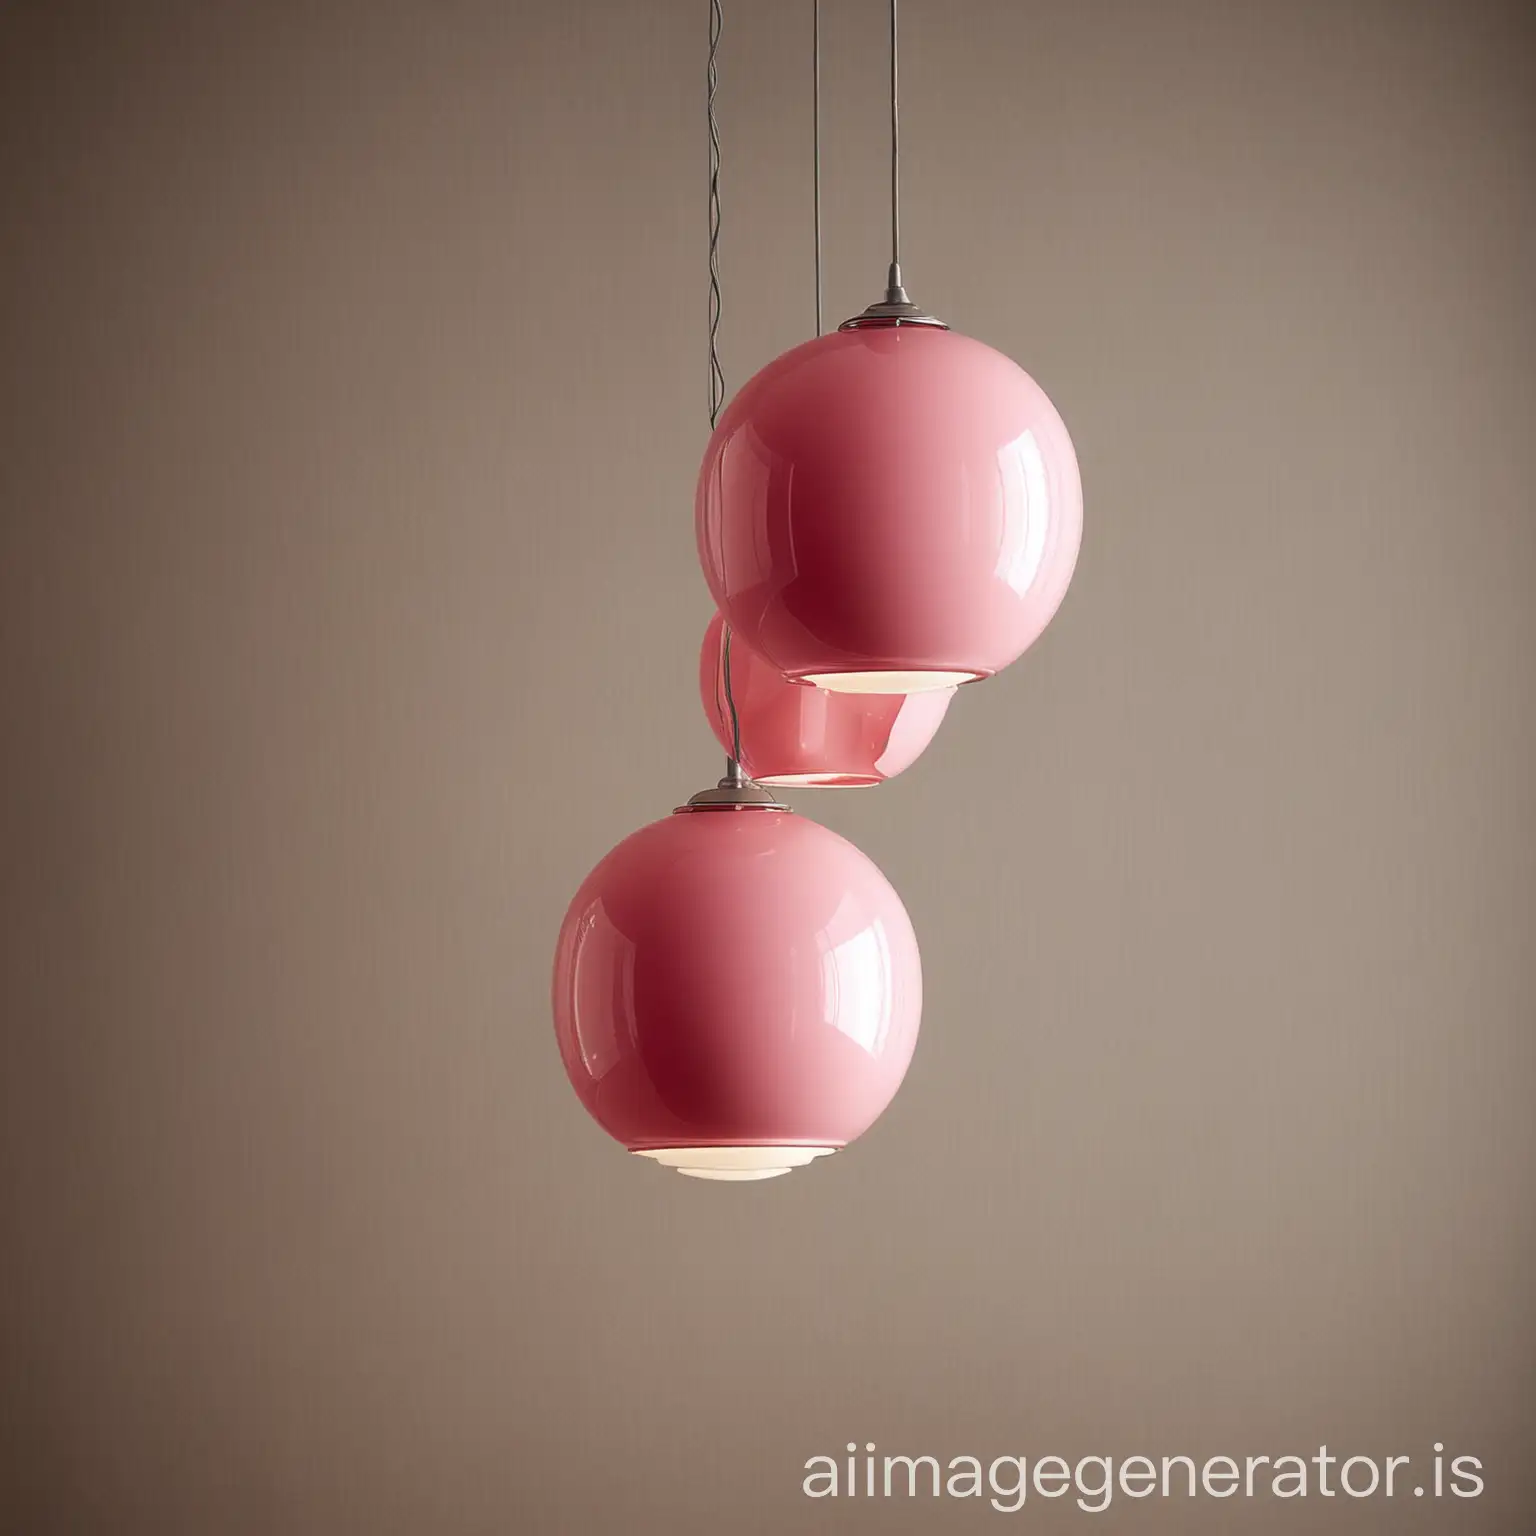 pink midcentury modern pendant with customisable shapes built in a modular fashion